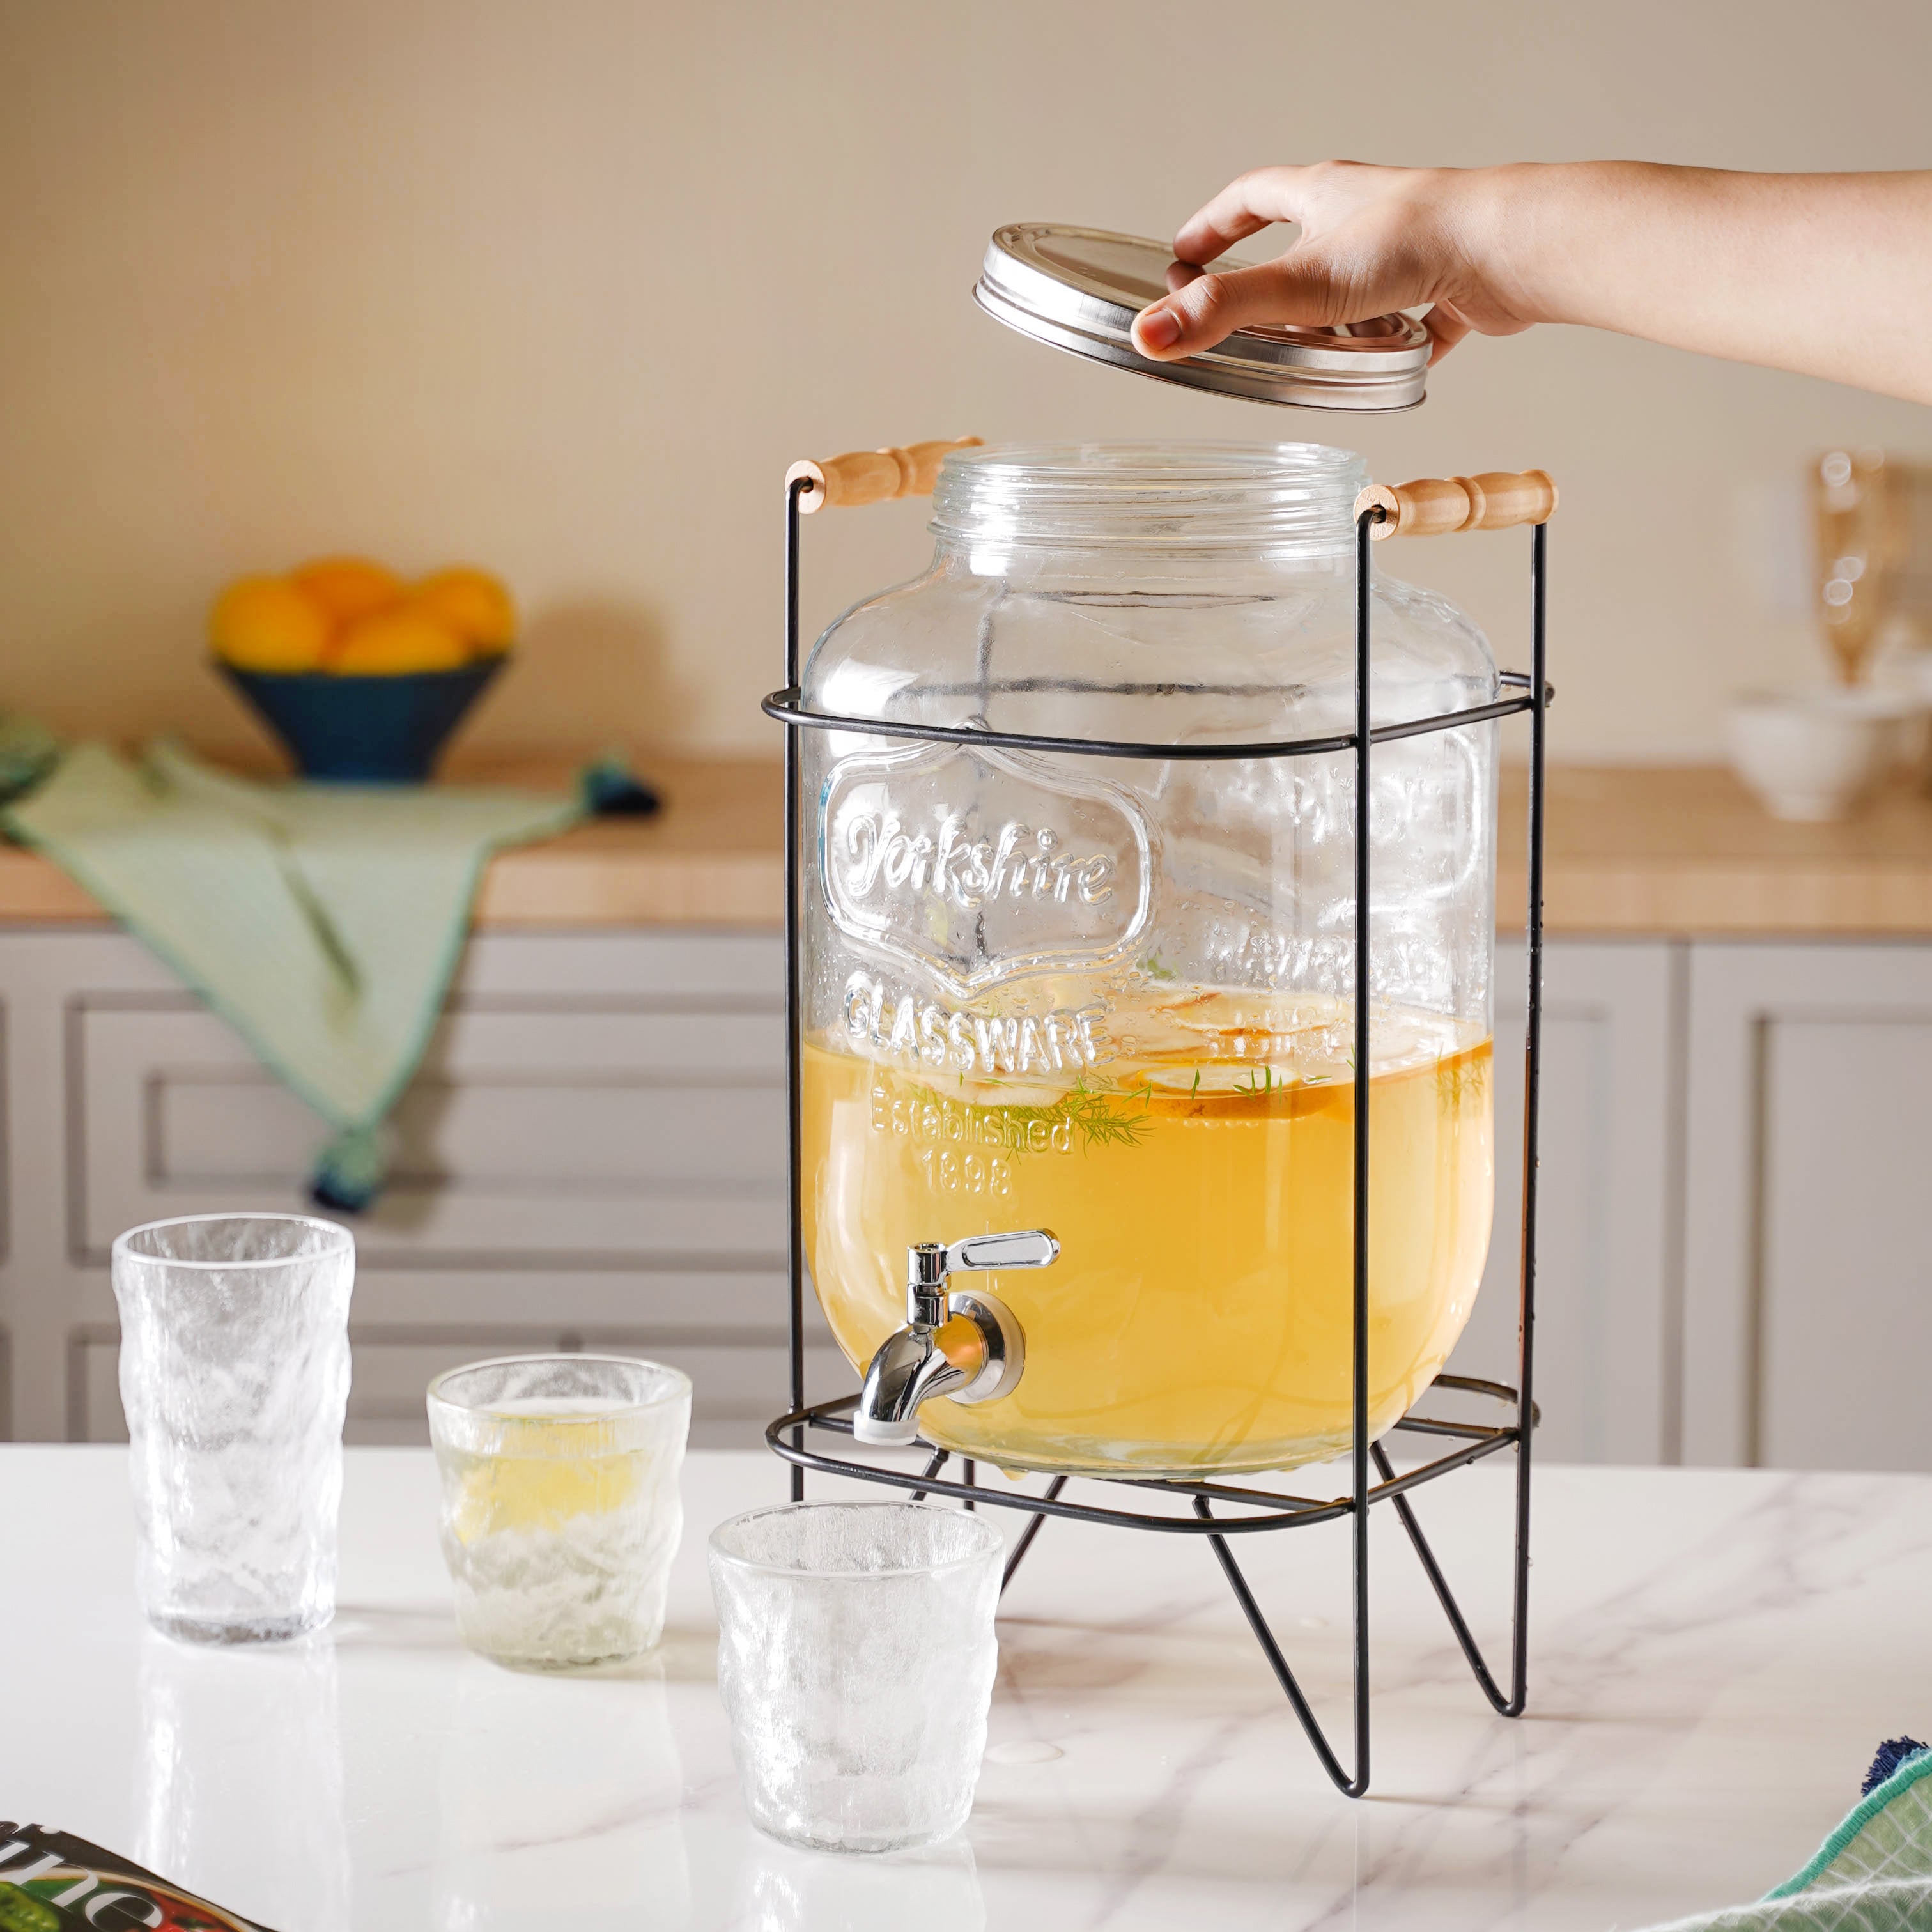 Up To 32% Off on Mason Jar Drink Dispensers